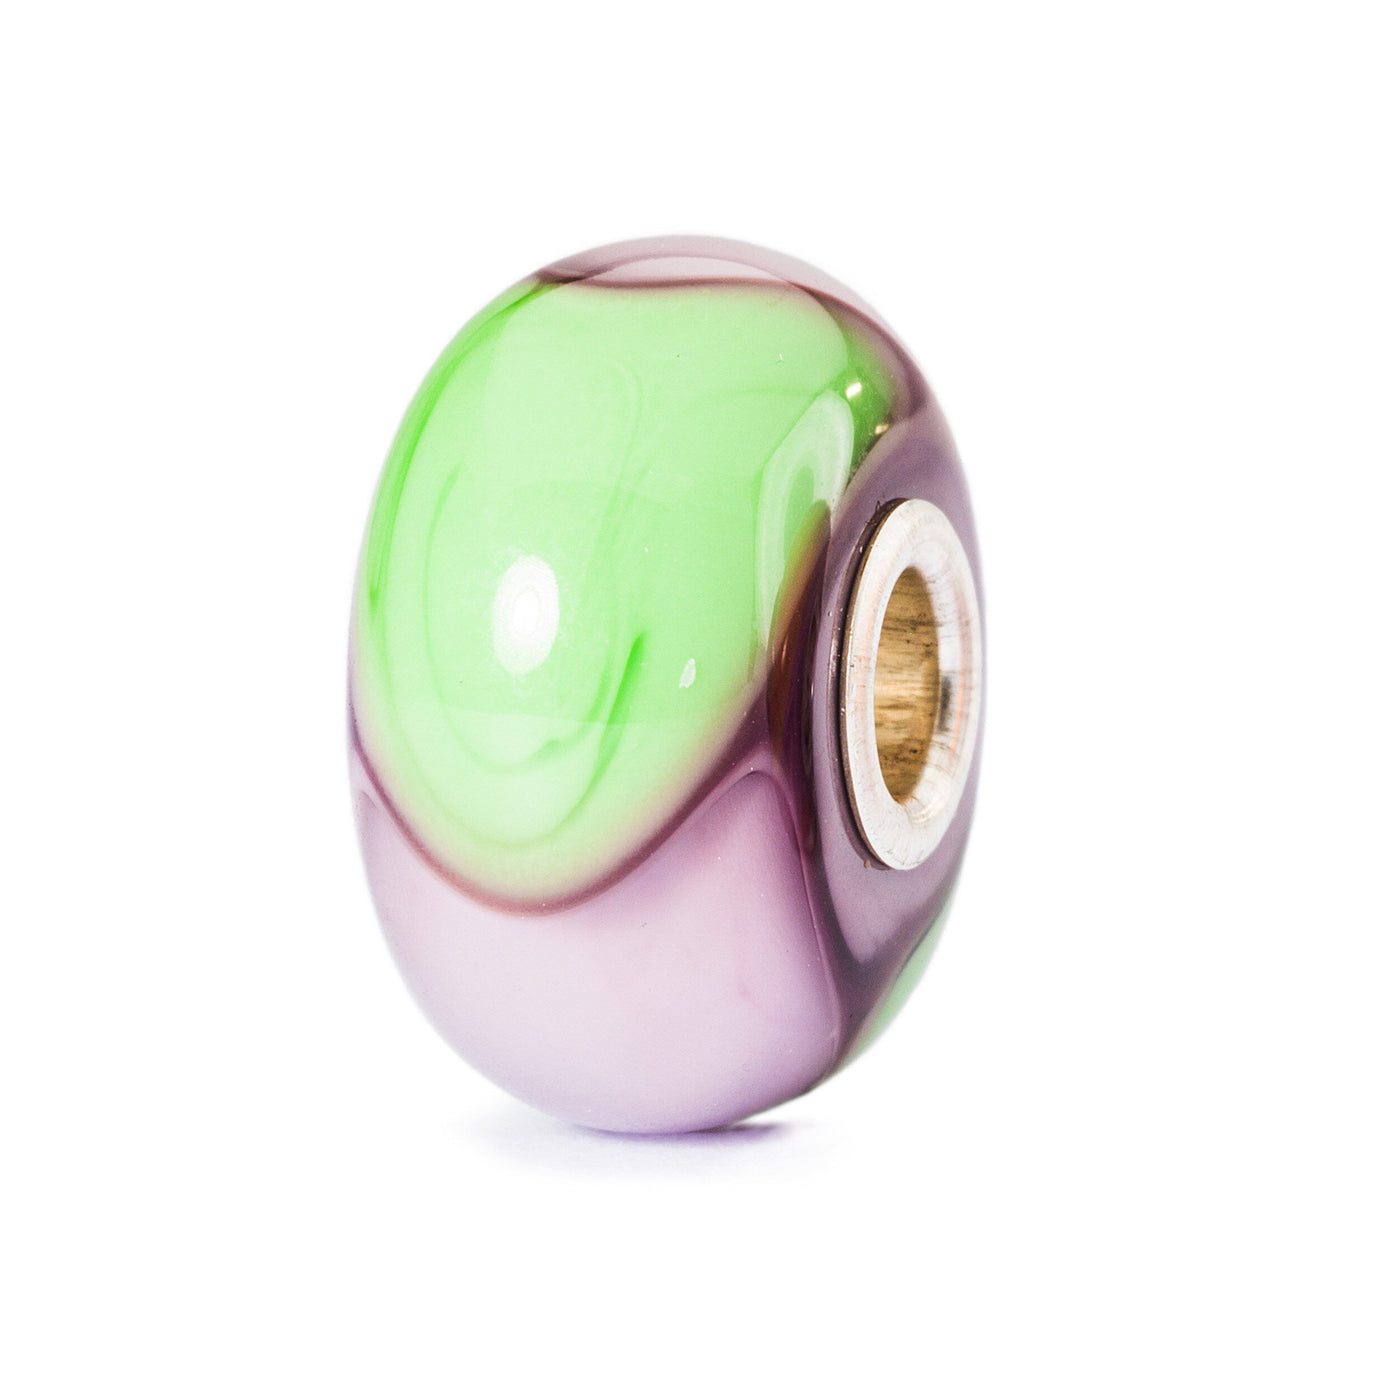 Mint and Lavender Armadillo - Trollbeads Canada